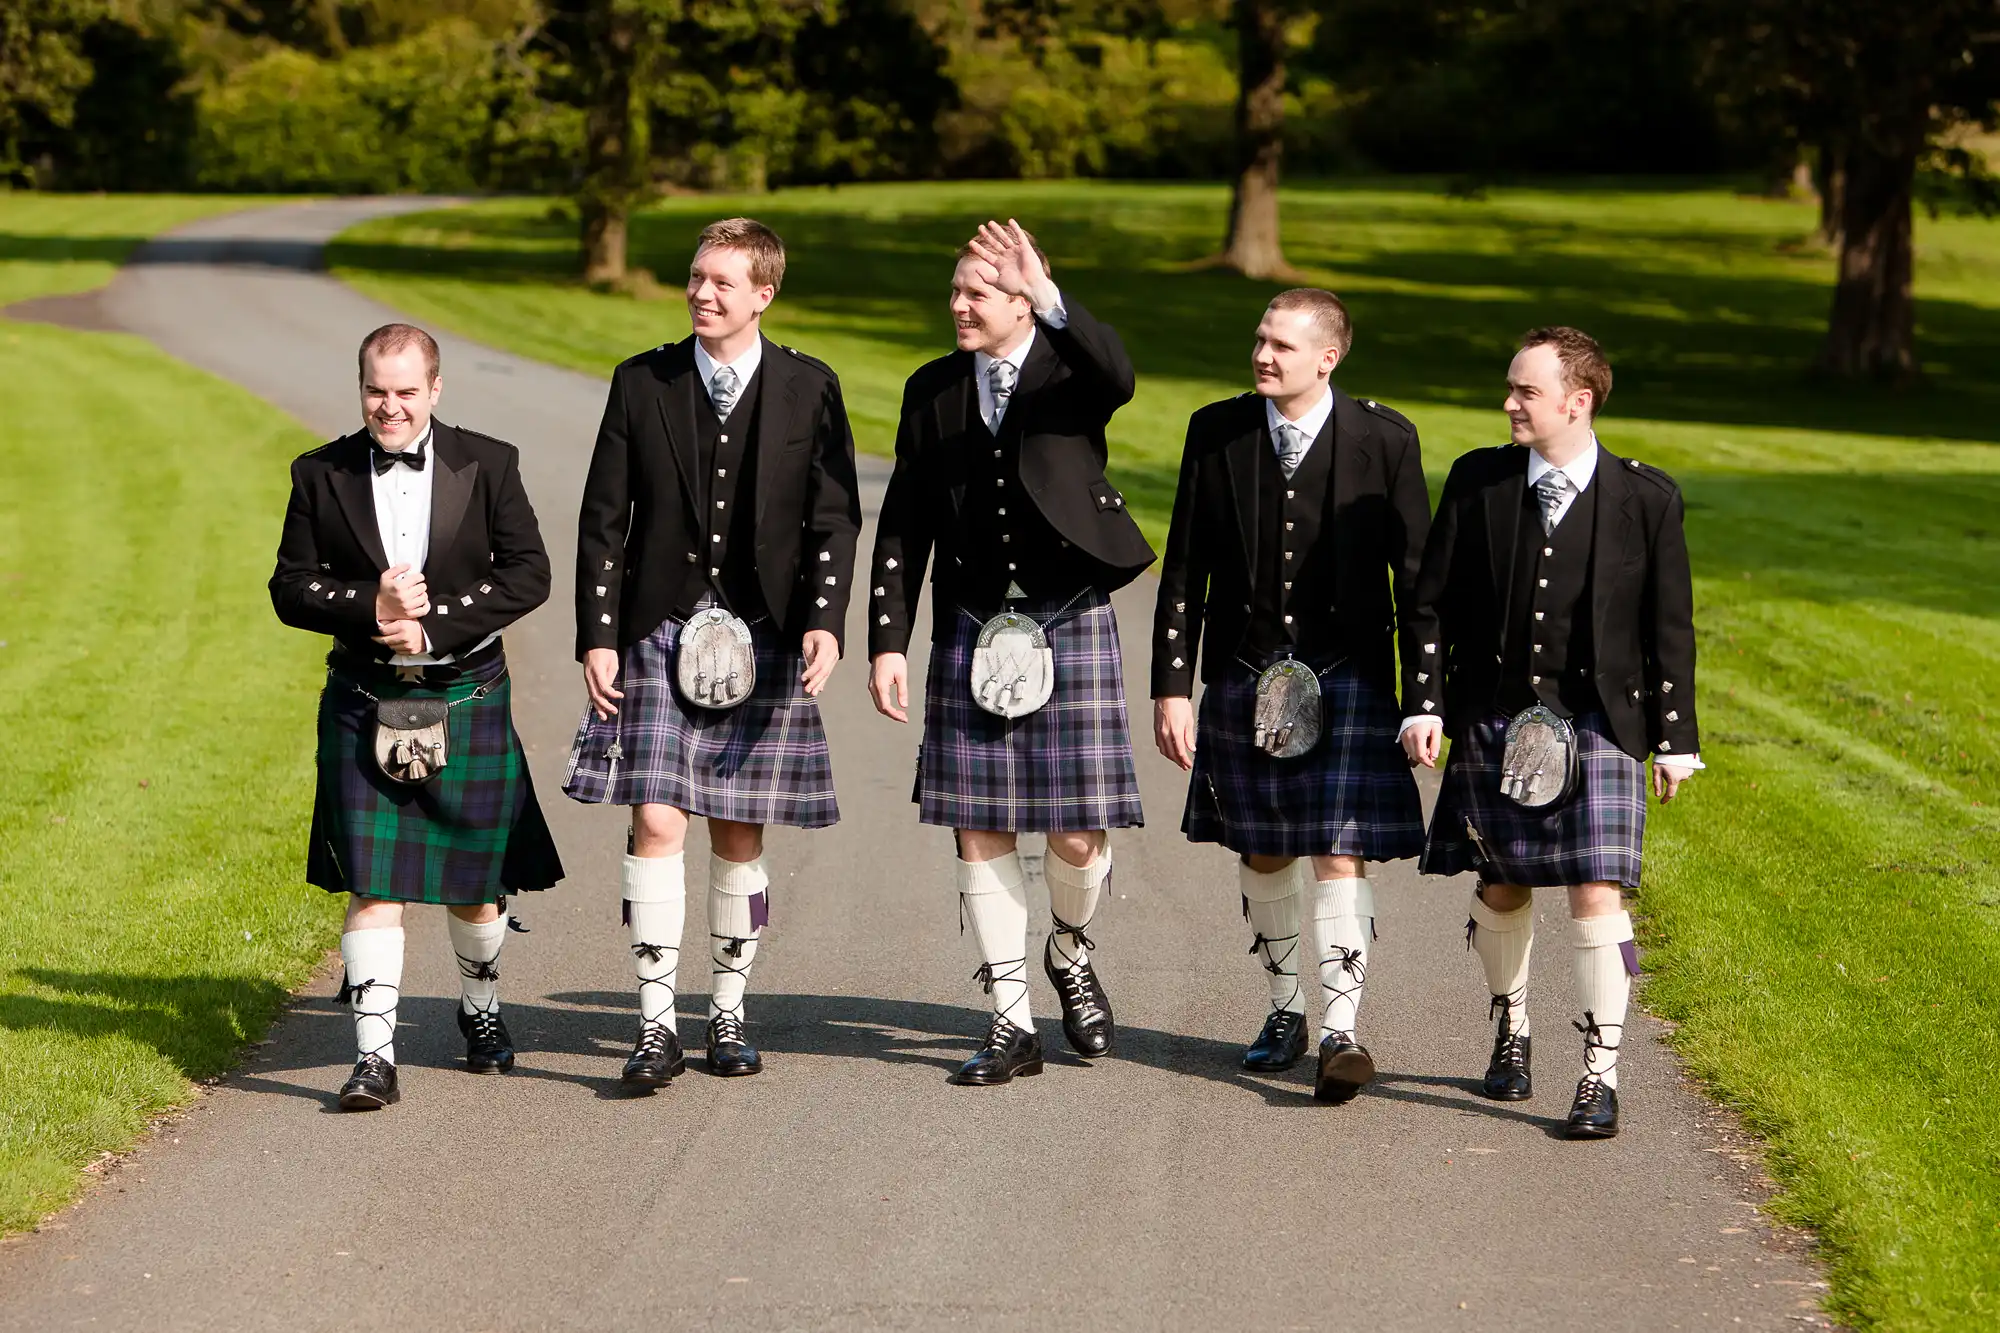 Five men in traditional scottish attire, including kilts and sporran, walking along a sunlit park path, smiling and gesturing.